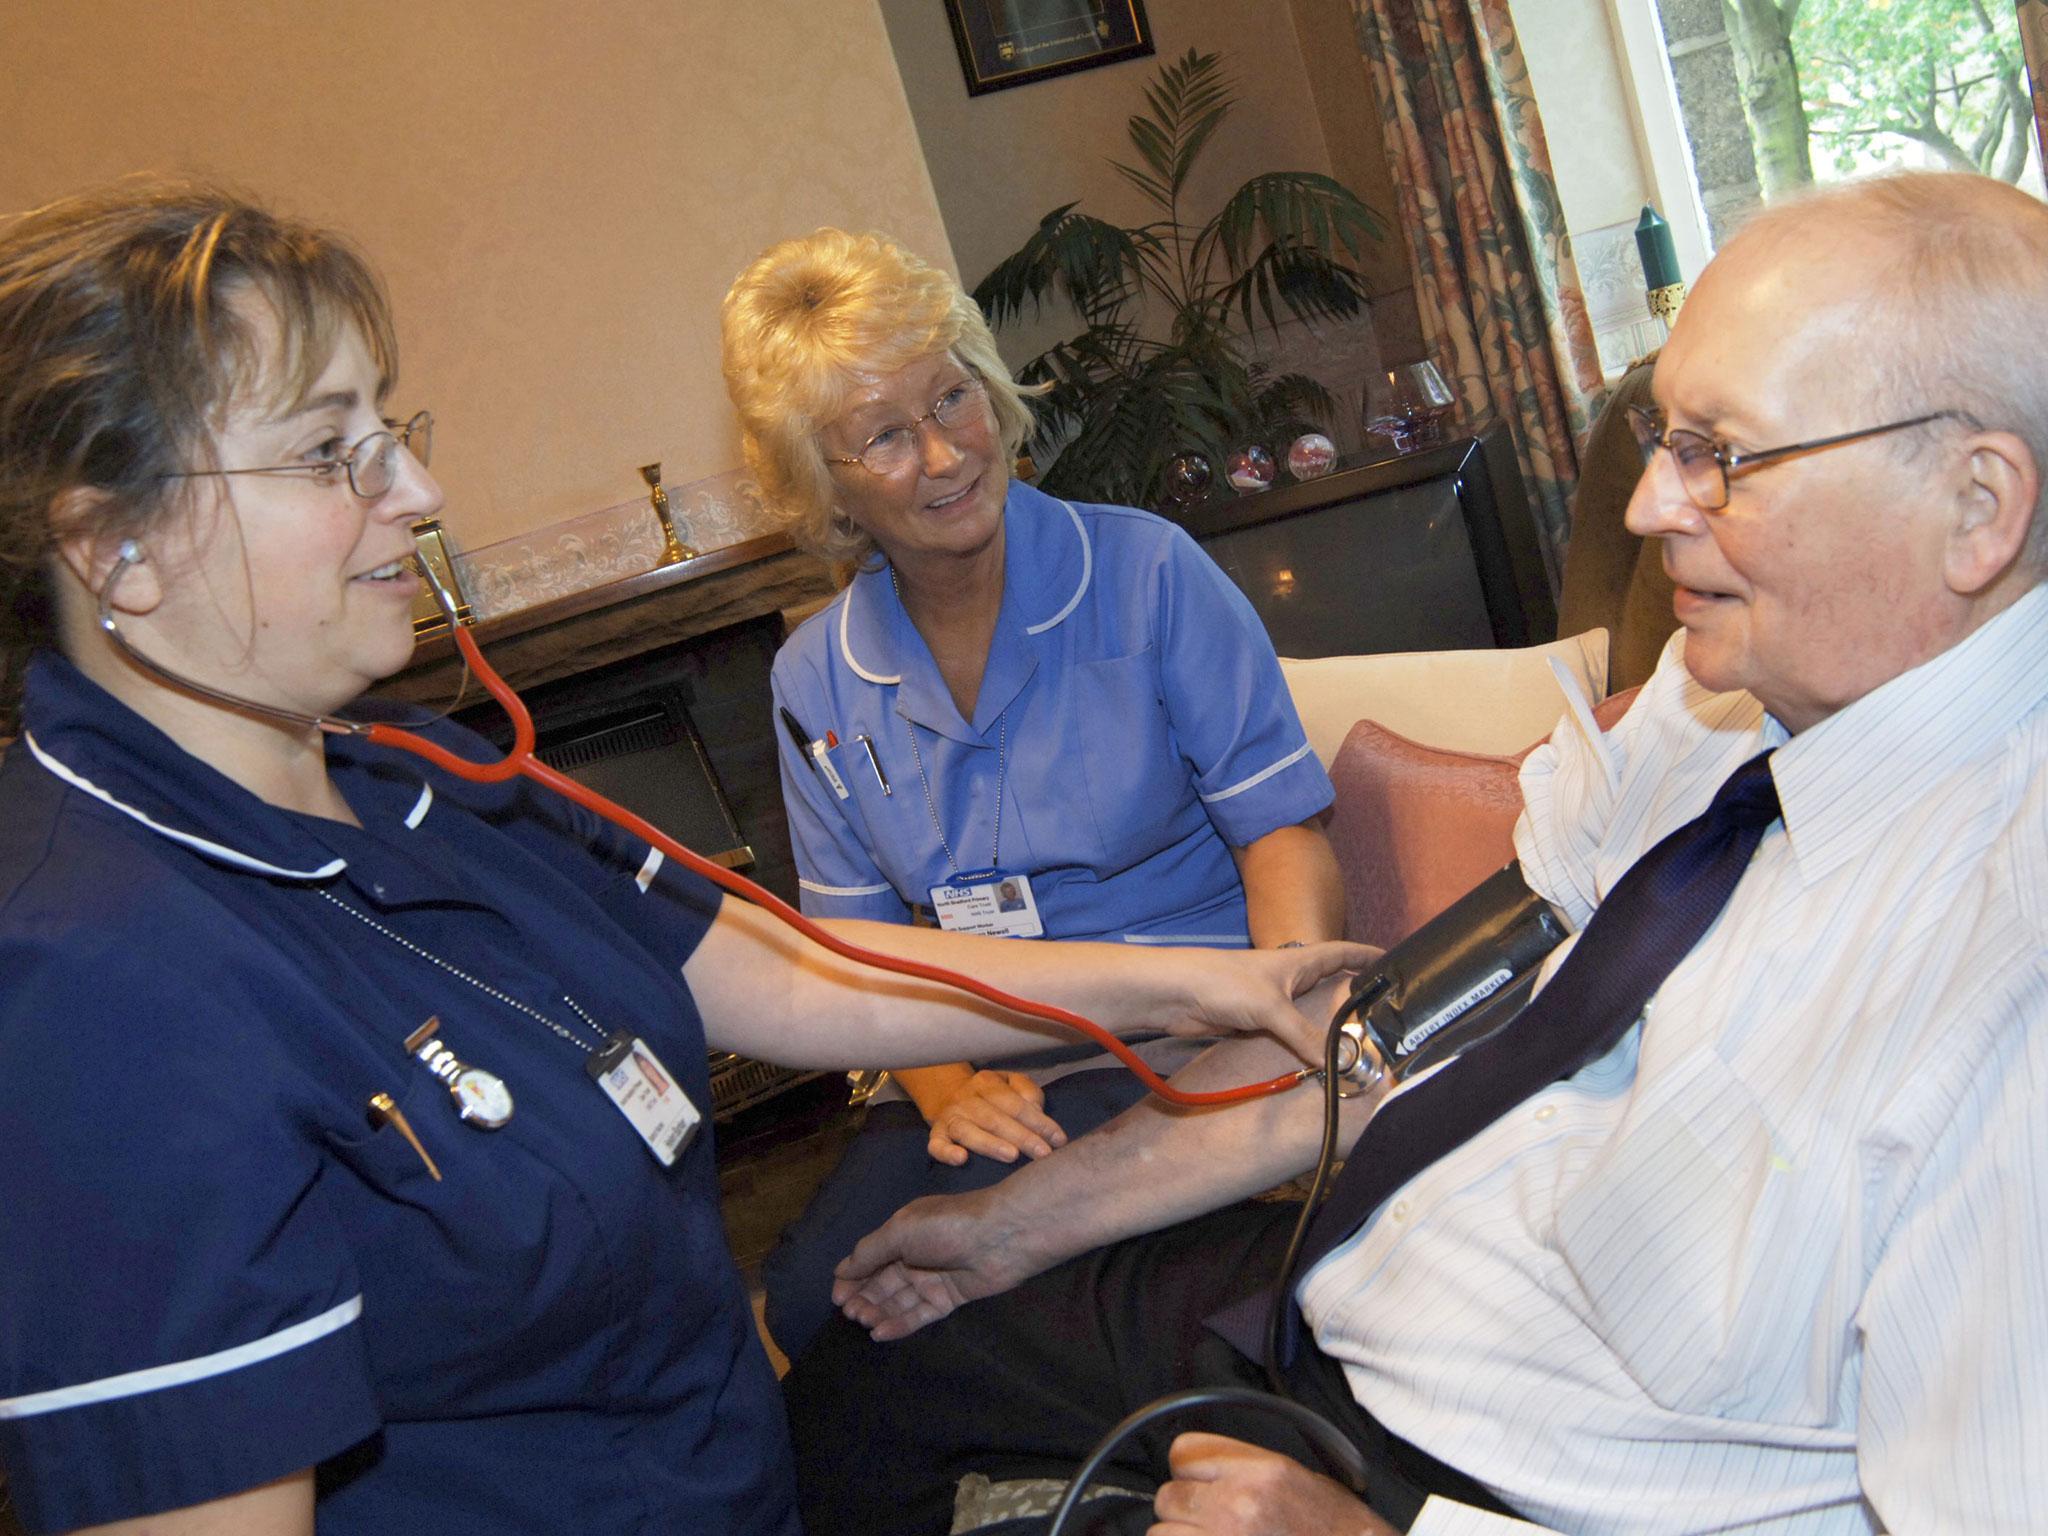 District nurses have been described as the “glue” of the entire community care system